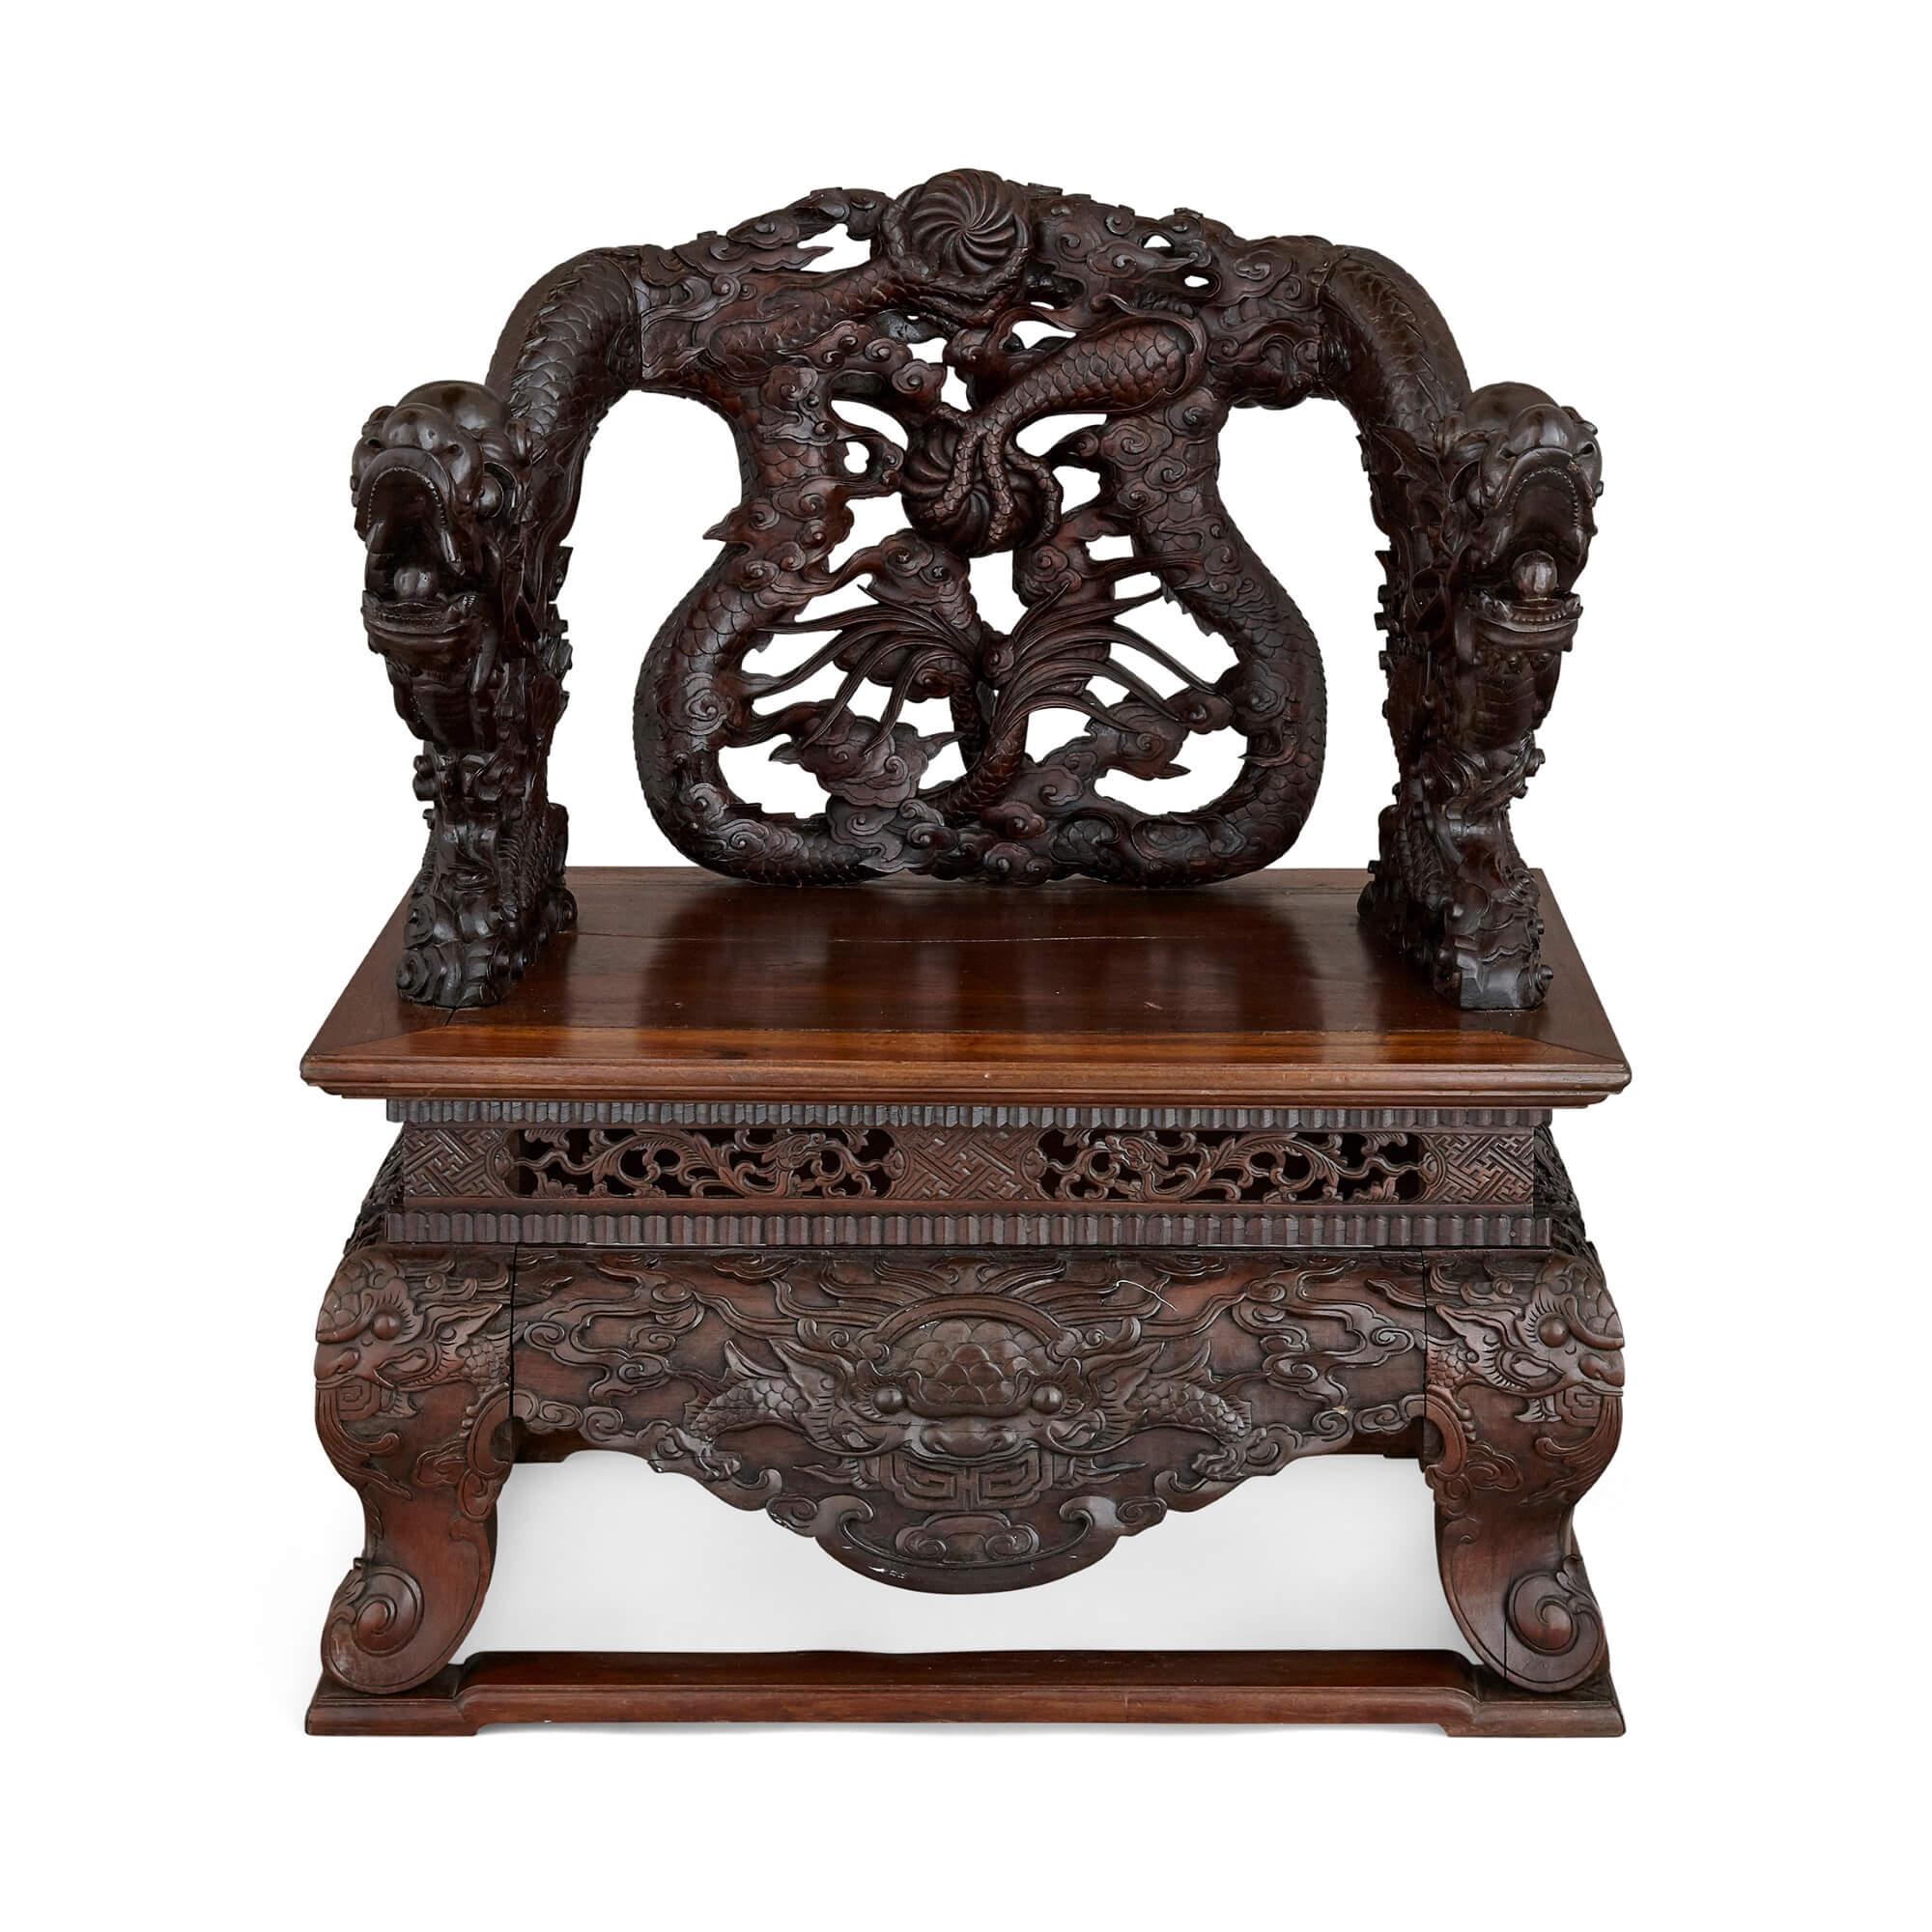 This pair of carved Chinese hongmu or rosewood armchairs date from the late Qing Dynasty, and combine extravagance and opulence with style and refinement. They are adorned with mythological motifs, typical of this period, the major decoration here